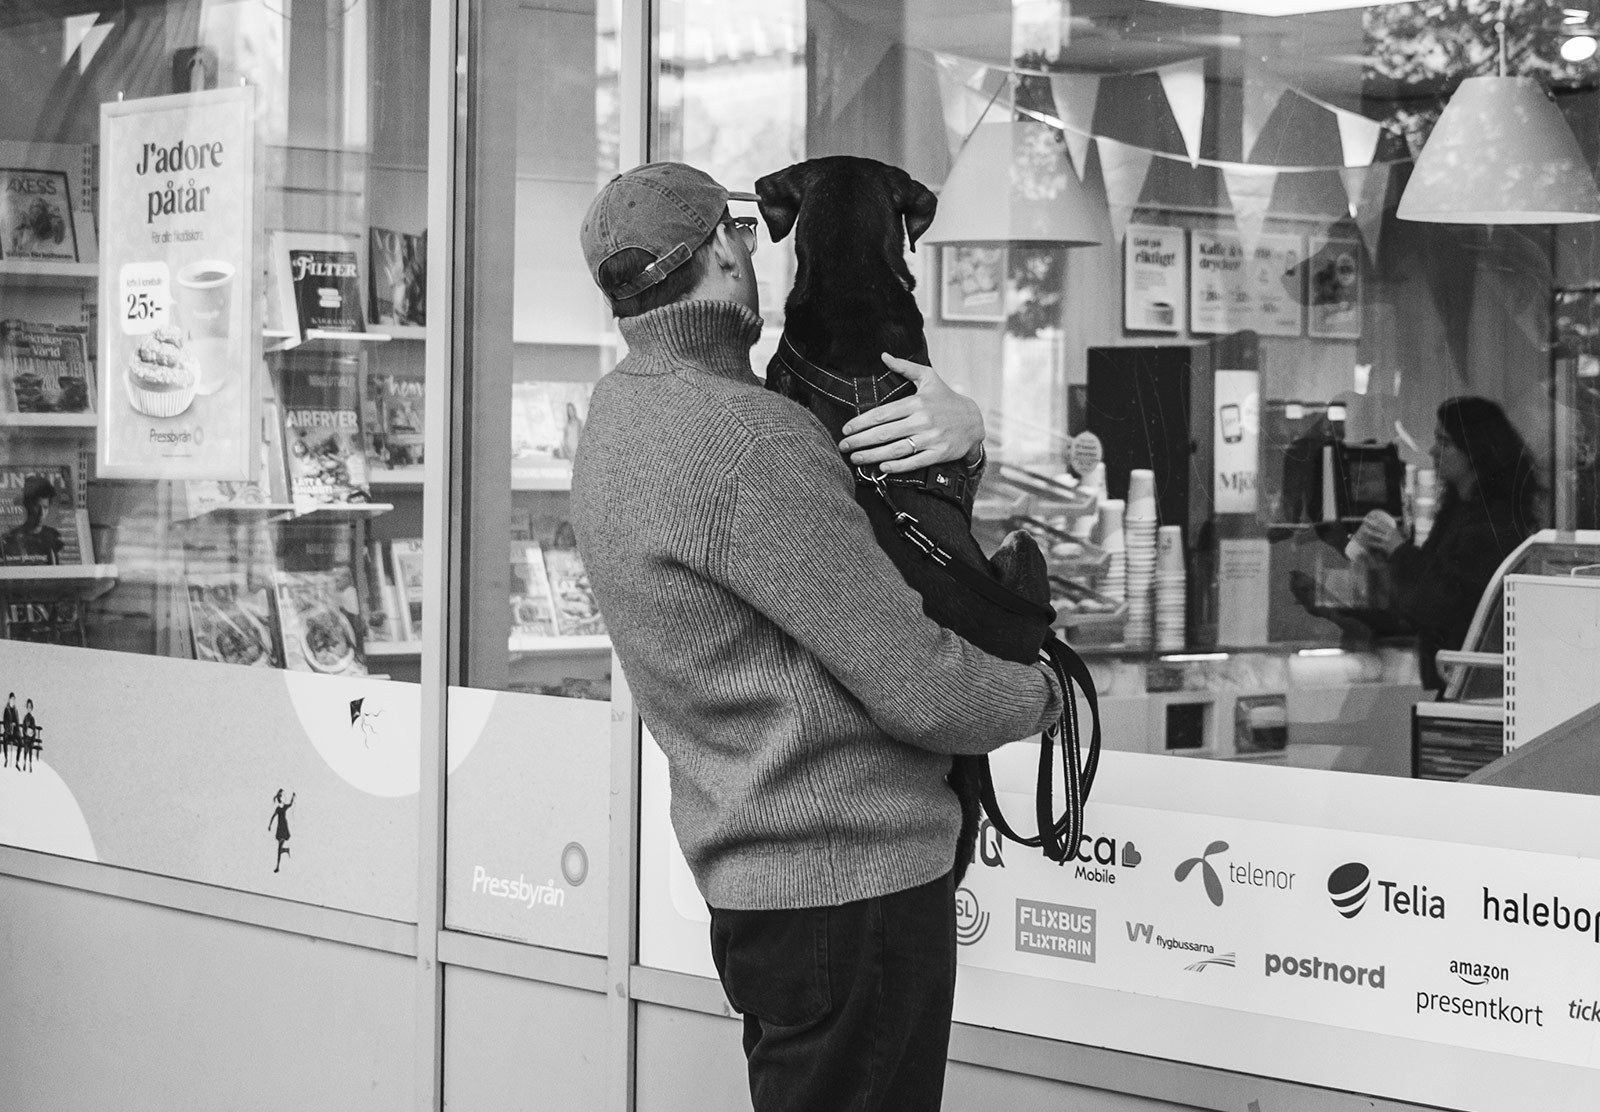 Man hold a dog and waiting outside a shop